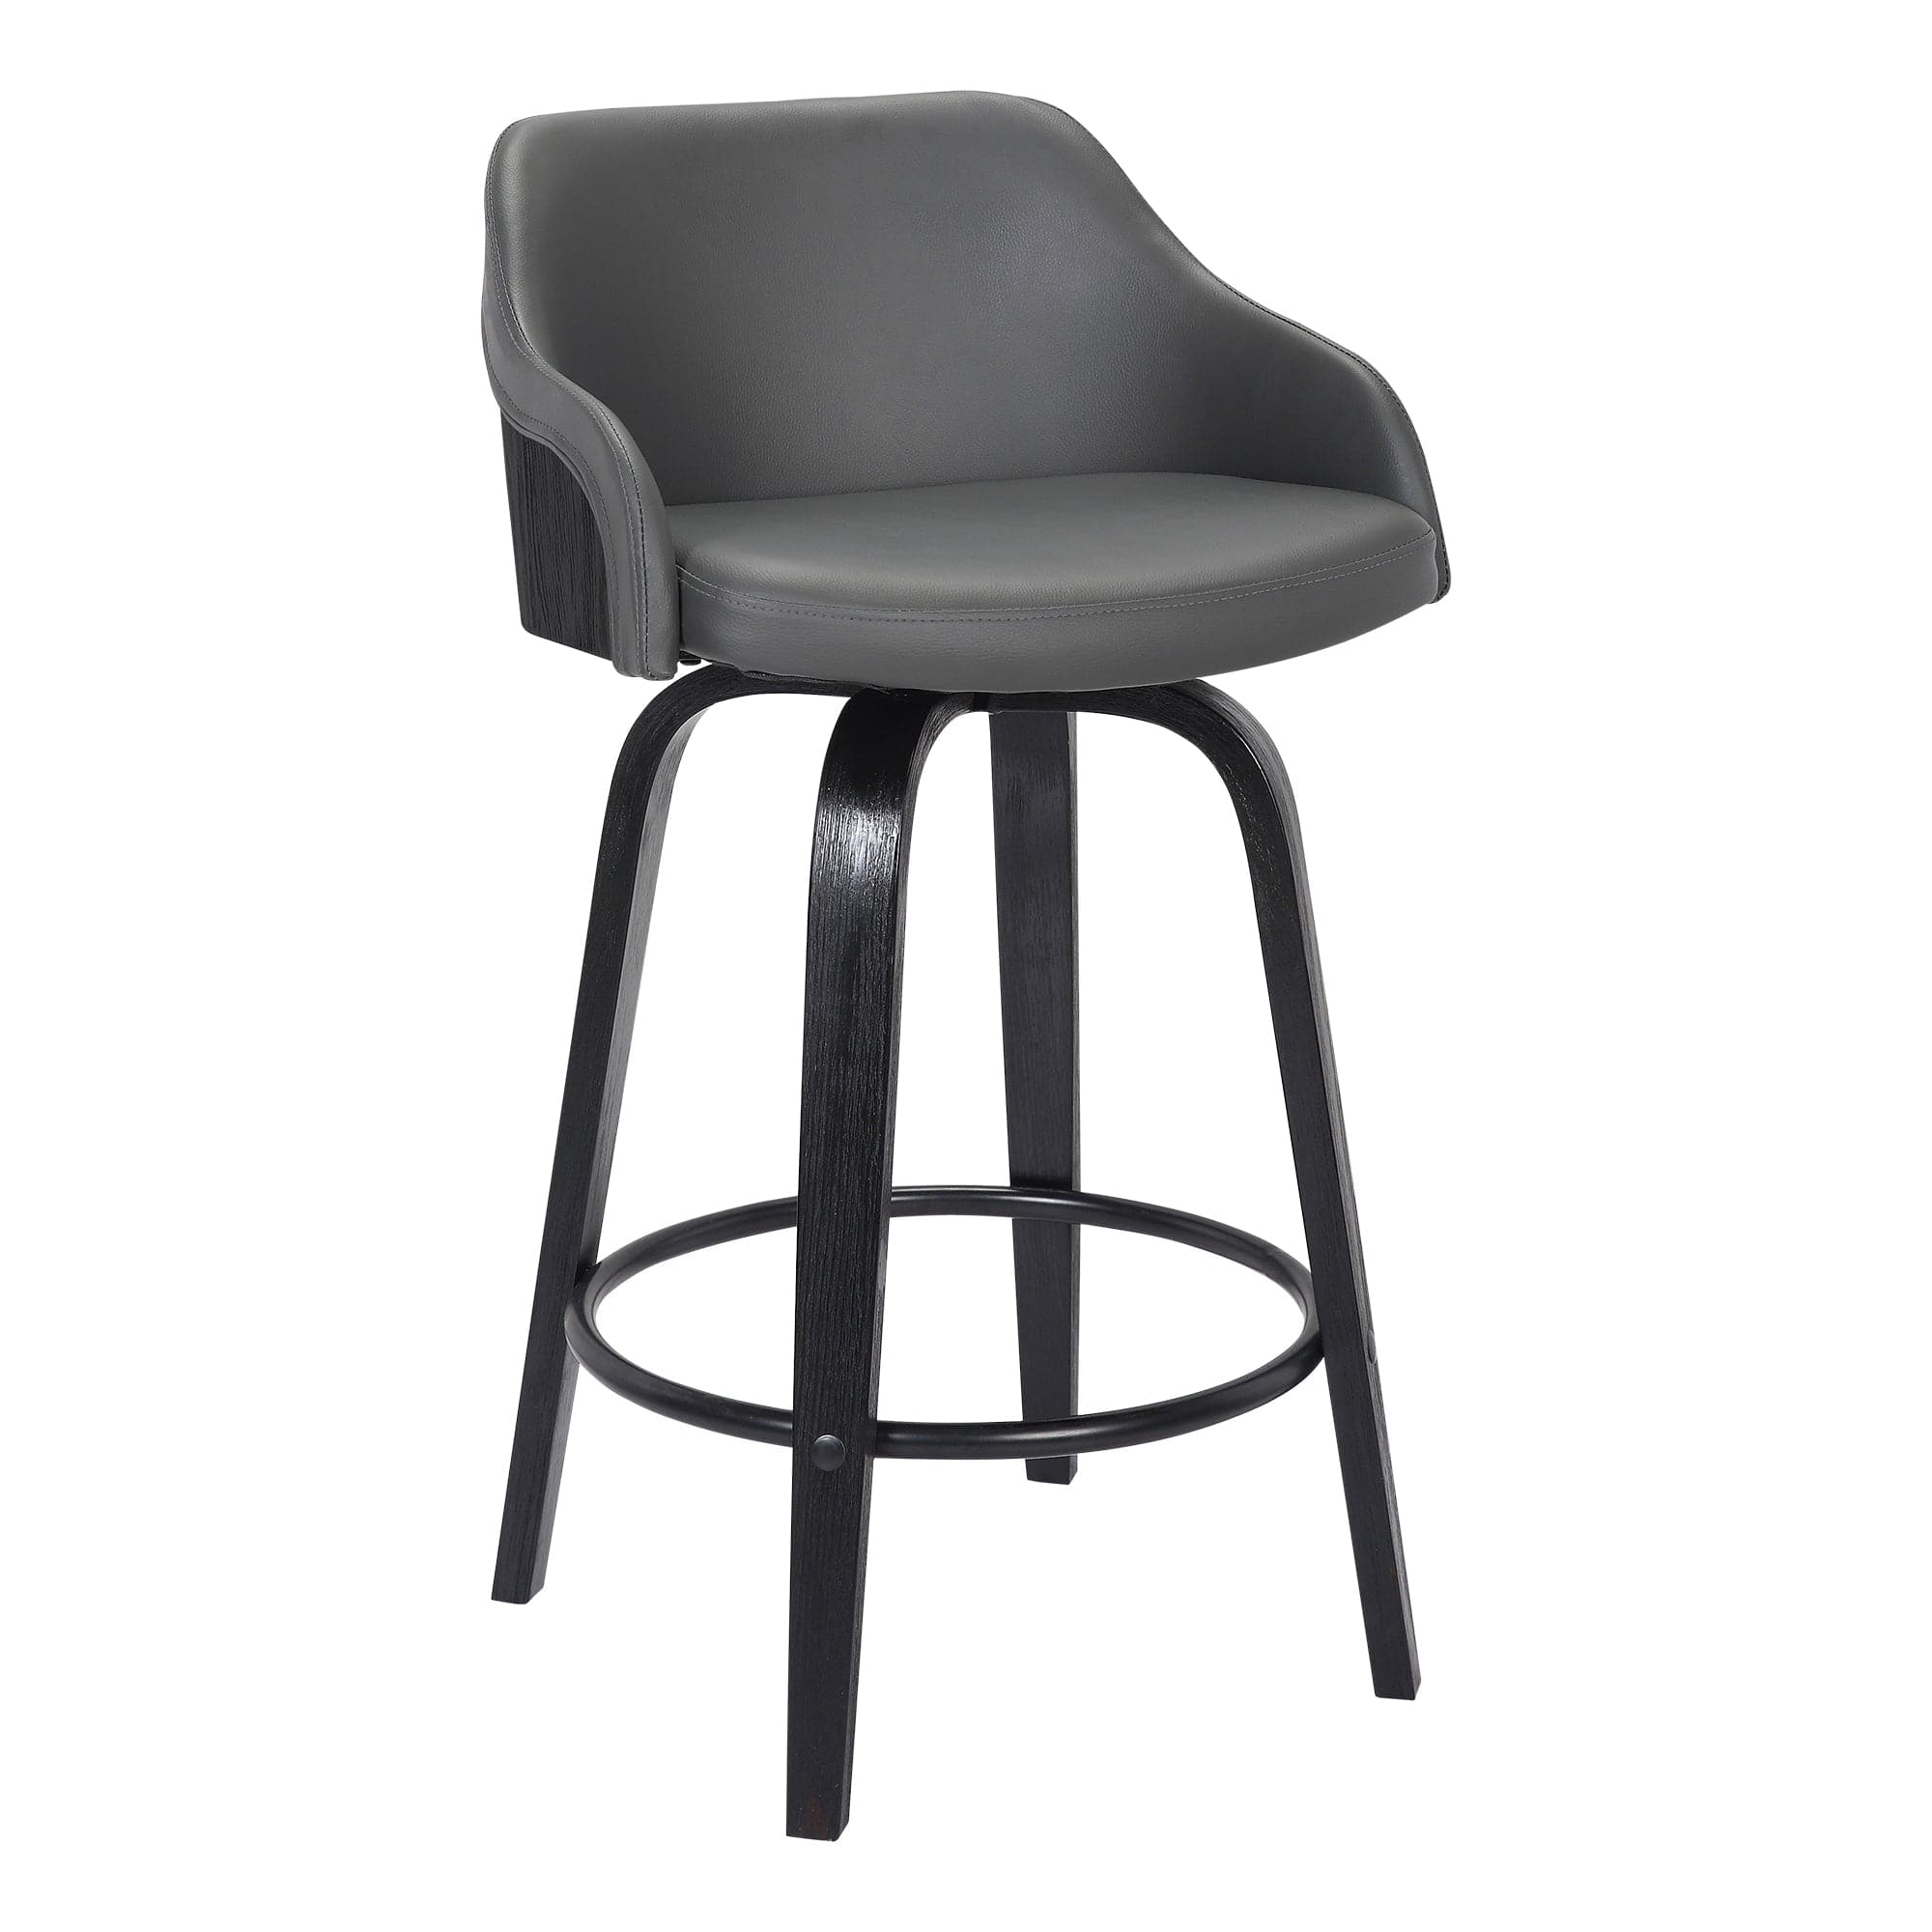 Armen Living Barstool Grey Faux Leather and Black Wood Bar Stool Armen Living - Alec 26" Counter Height Swivel Grey Faux Leather and Black Wood Bar Stool | LCAEBABLGR26